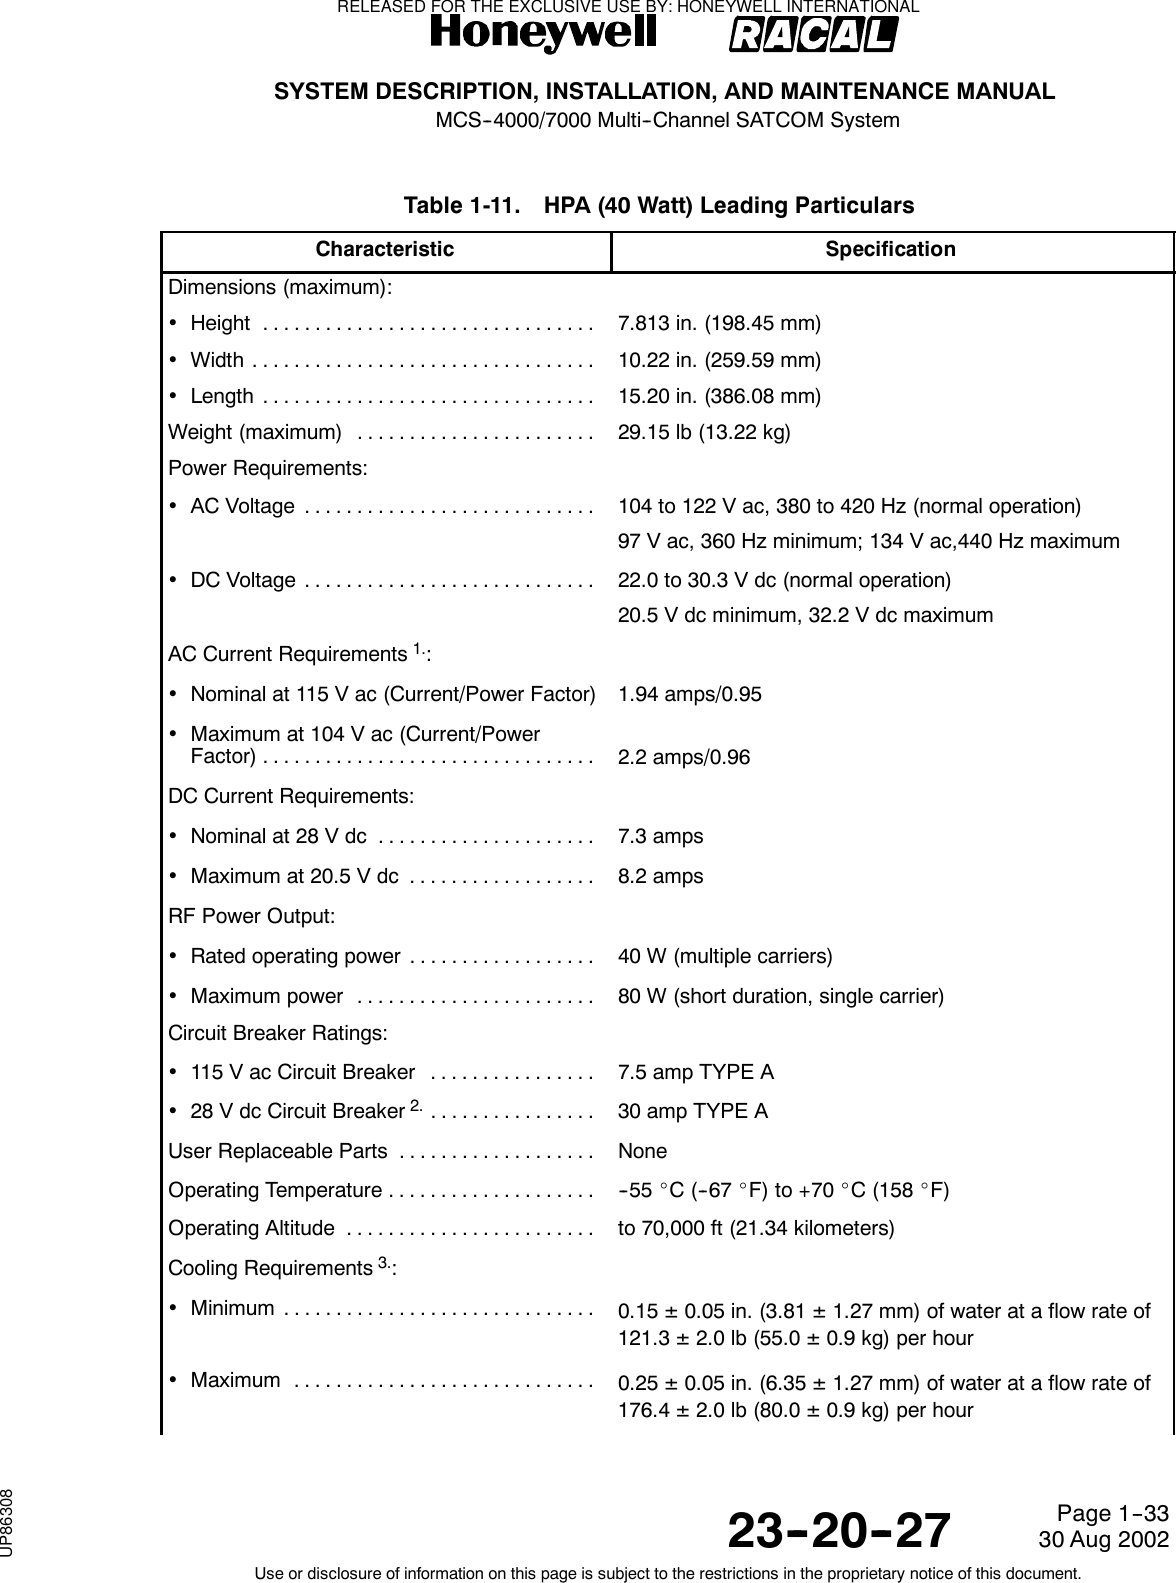 SYSTEM DESCRIPTION, INSTALLATION, AND MAINTENANCE MANUALMCS--4000/7000 Multi--Channel SATCOM System23--20--2730 Aug 2002Use or disclosure of information on this page is subject to the restrictions in the proprietary notice of this document.Page 1--33Table 1-11. HPA (40 Watt) Leading ParticularsCharacteristic SpecificationDimensions (maximum):•Height ................................ 7.813 in. (198.45 mm)•Width ................................. 10.22 in. (259.59 mm)•Length ................................ 15.20 in. (386.08 mm)Weight (maximum) ....................... 29.15 lb (13.22 kg)Power Requirements:•ACVoltage ............................ 104 to 122 V ac, 380 to 420 Hz (normal operation)97 V ac, 360 Hz minimum; 134 V ac,440 Hz maximum•DCVoltage ............................ 22.0 to 30.3 V dc (normal operation)20.5 V dc minimum, 32.2 V dc maximumAC Current Requirements1.:•Nominal at 115 V ac (Current/Power Factor) 1.94 amps/0.95•Maximum at 104 V ac (Current/PowerFactor)................................ 2.2 amps/0.96DC Current Requirements:•Nominal at 28 V dc ..................... 7.3 amps•Maximumat20.5Vdc .................. 8.2 ampsRF Power Output:•Rated operating power .................. 40 W (multiple carriers)•Maximumpower ....................... 80 W (short duration, single carrier)Circuit Breaker Ratings:•115VacCircuitBreaker ................ 7.5 amp TYPE A•28 V dc Circuit Breaker2................. 30 amp TYPE AUser Replaceable Parts ................... NoneOperatingTemperature.................... -- 5 5 _C(--67_F) to +70 _C (158 _F)OperatingAltitude ........................ to 70,000 ft (21.34 kilometers)Cooling Requirements3.:•Minimum .............................. 0.15 ±0.05 in. (3.81 ±1.27 mm) of water at a flow rate of121.3 ±2.0 lb (55.0 ±0.9 kg) per hour•Maximum ............................. 0.25 ±0.05 in. (6.35 ±1.27 mm) of water at a flow rate of176.4 ±2.0 lb (80.0 ±0.9 kg) per hourRELEASED FOR THE EXCLUSIVE USE BY: HONEYWELL INTERNATIONALUP86308